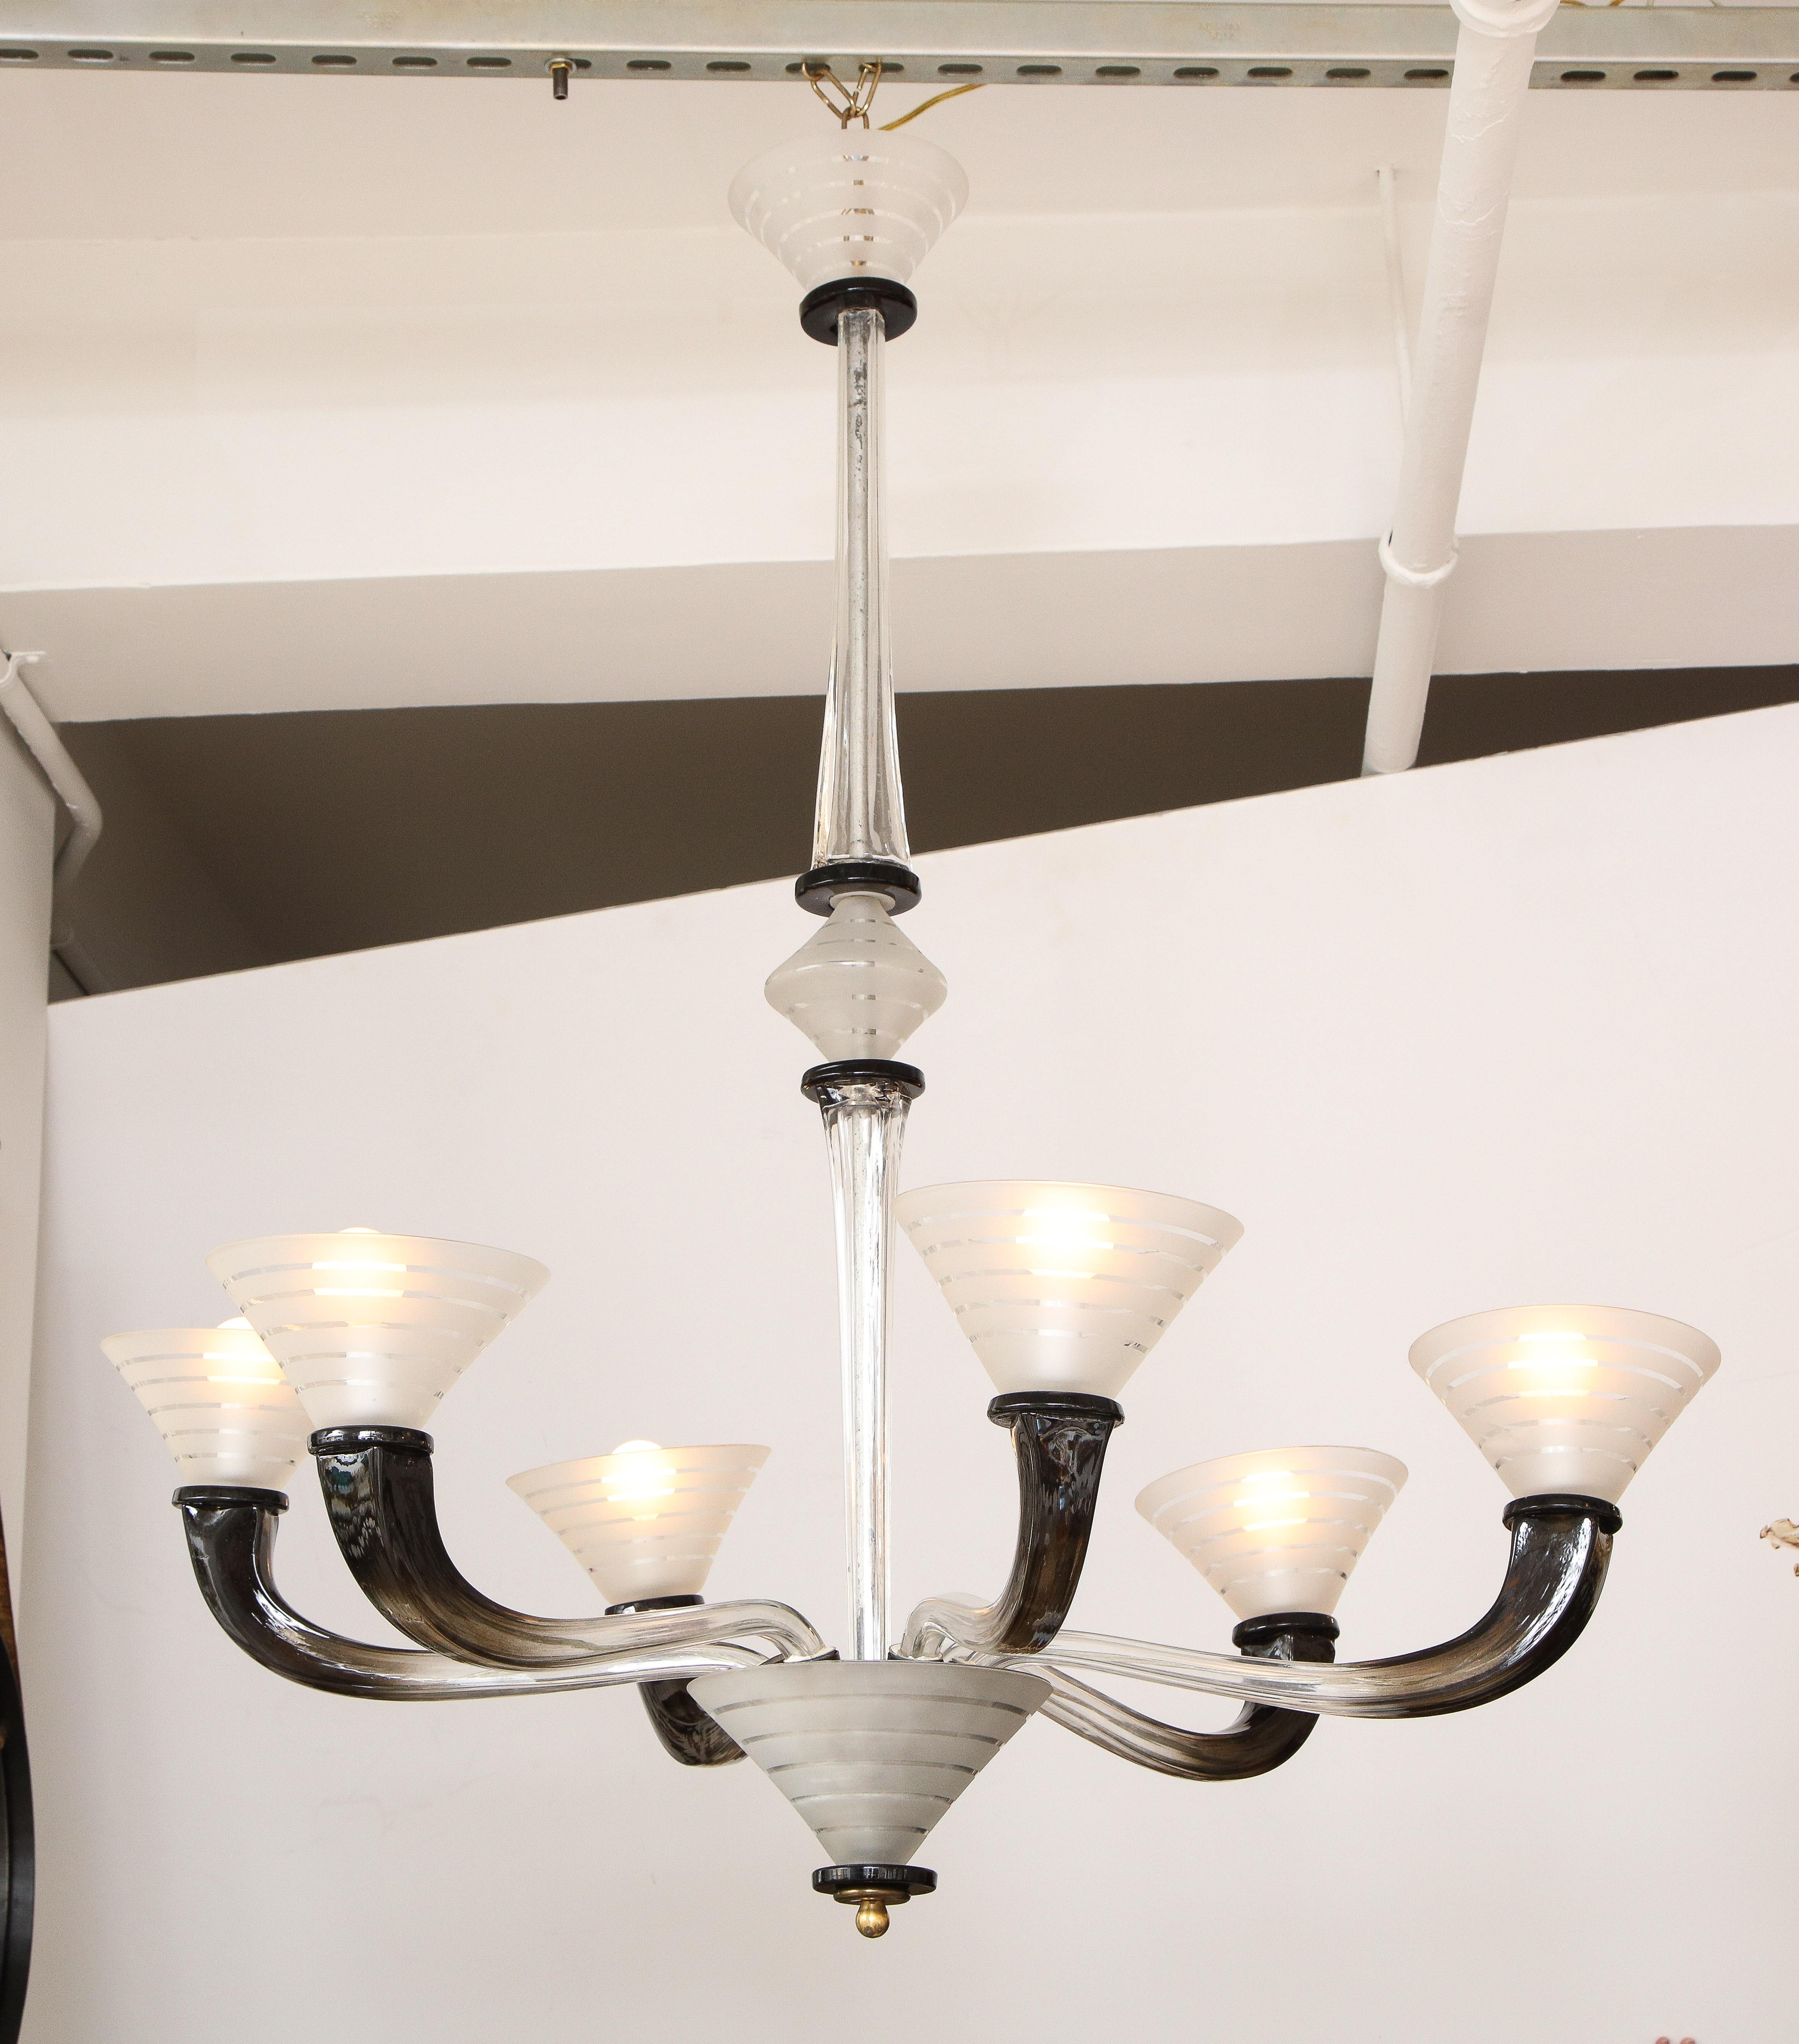 Italian Art Deco Frosted Glass Six Arm Chandelier, circa 1940's For Sale 2